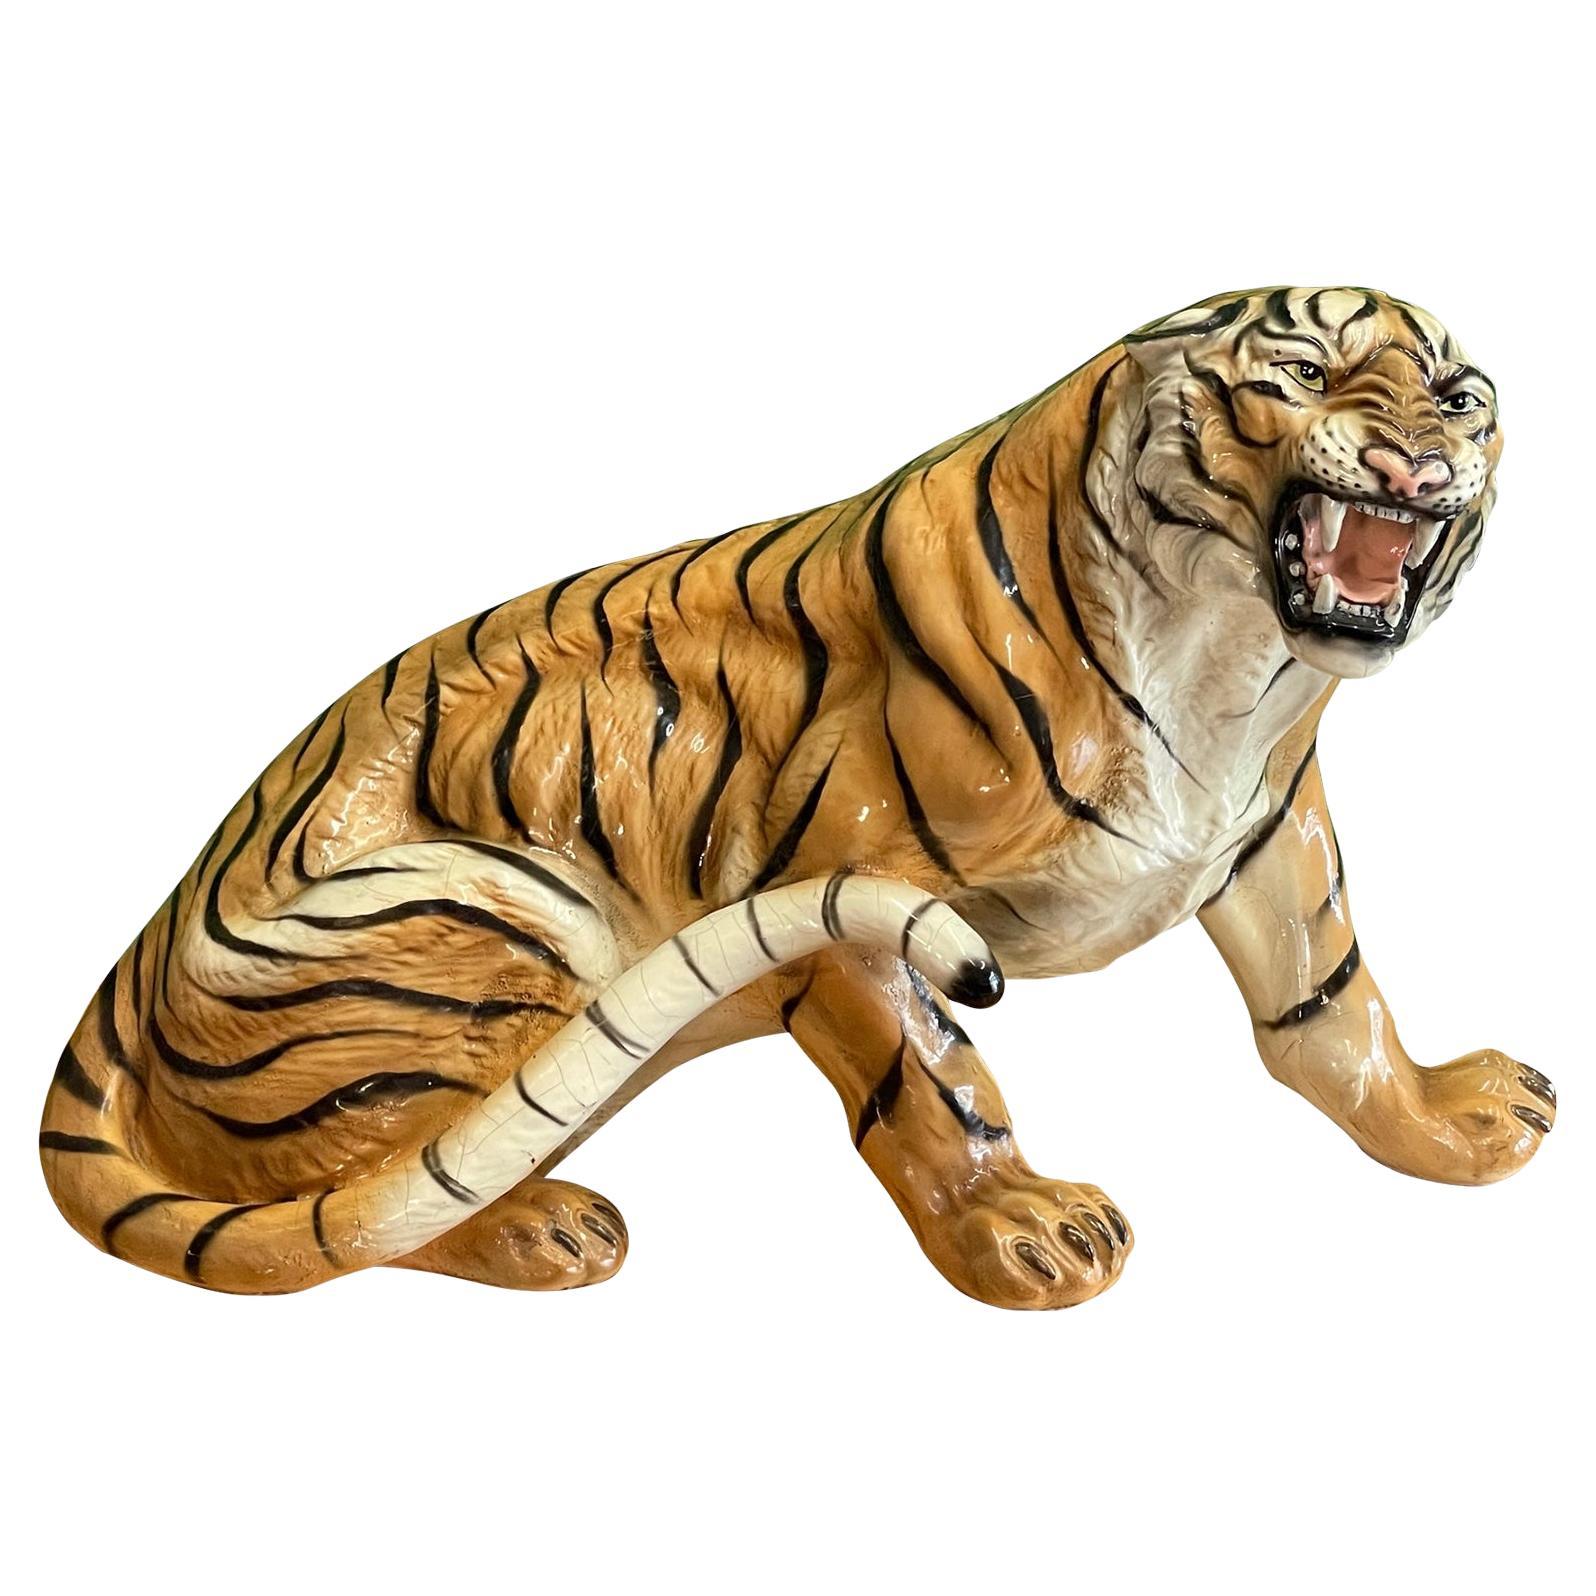 Large terracotta tiger sculpture features a menacing stance and a bright glazed finish. Good condition with imperfections consistent with age, including a few hairline cracks but not affecting the structural integrity of the piece. See photos for